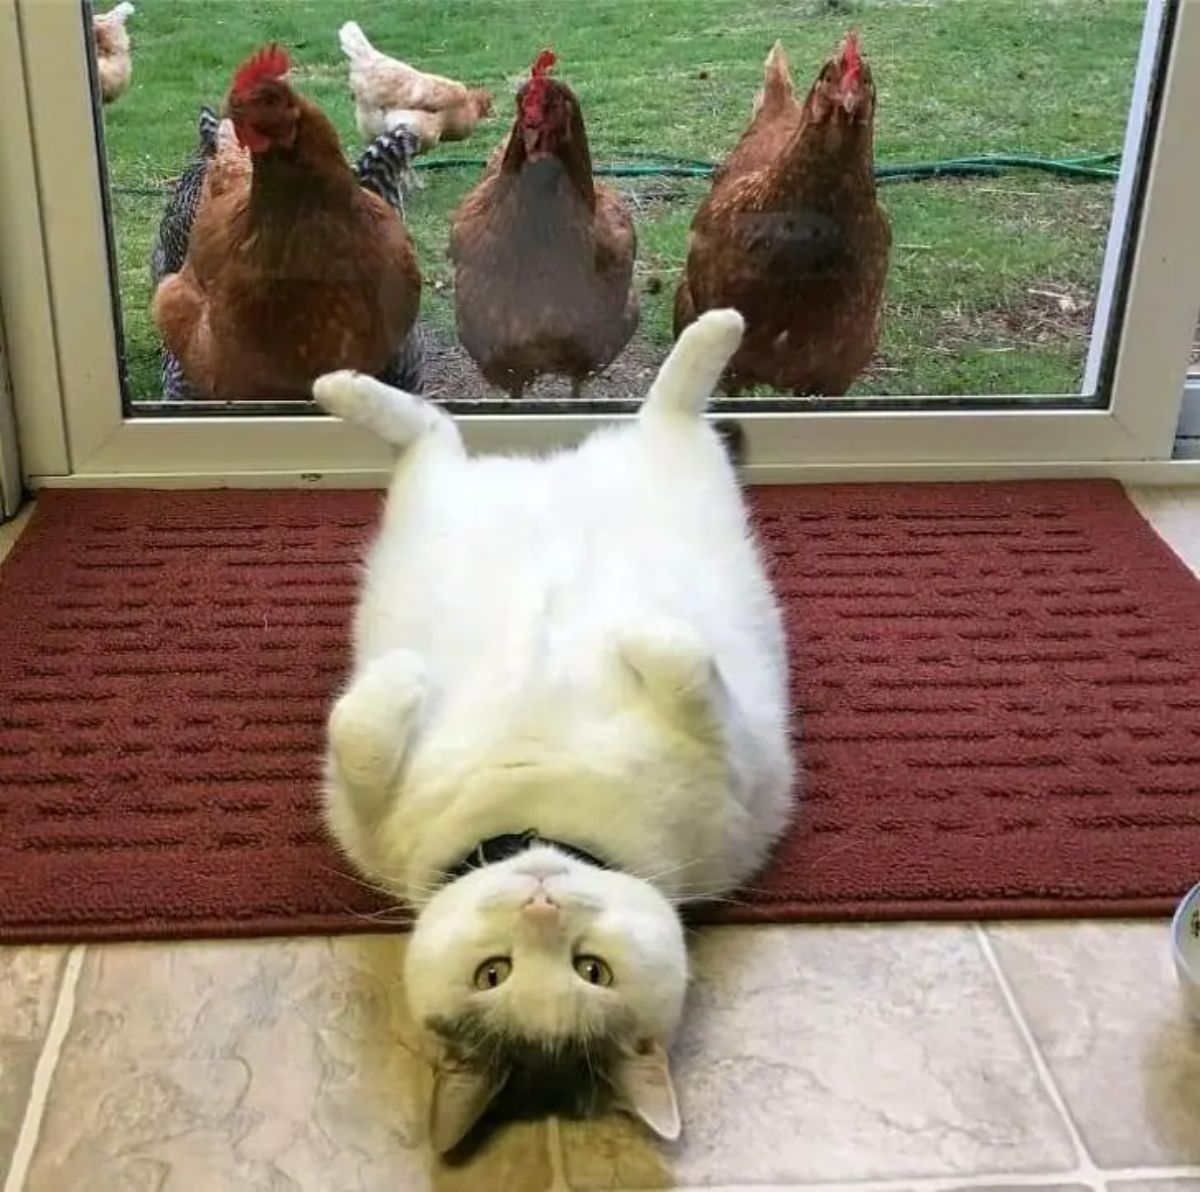 white and black cat laying belly up on a red carpet in front of a glass door with brown and black and white chickens on the other side